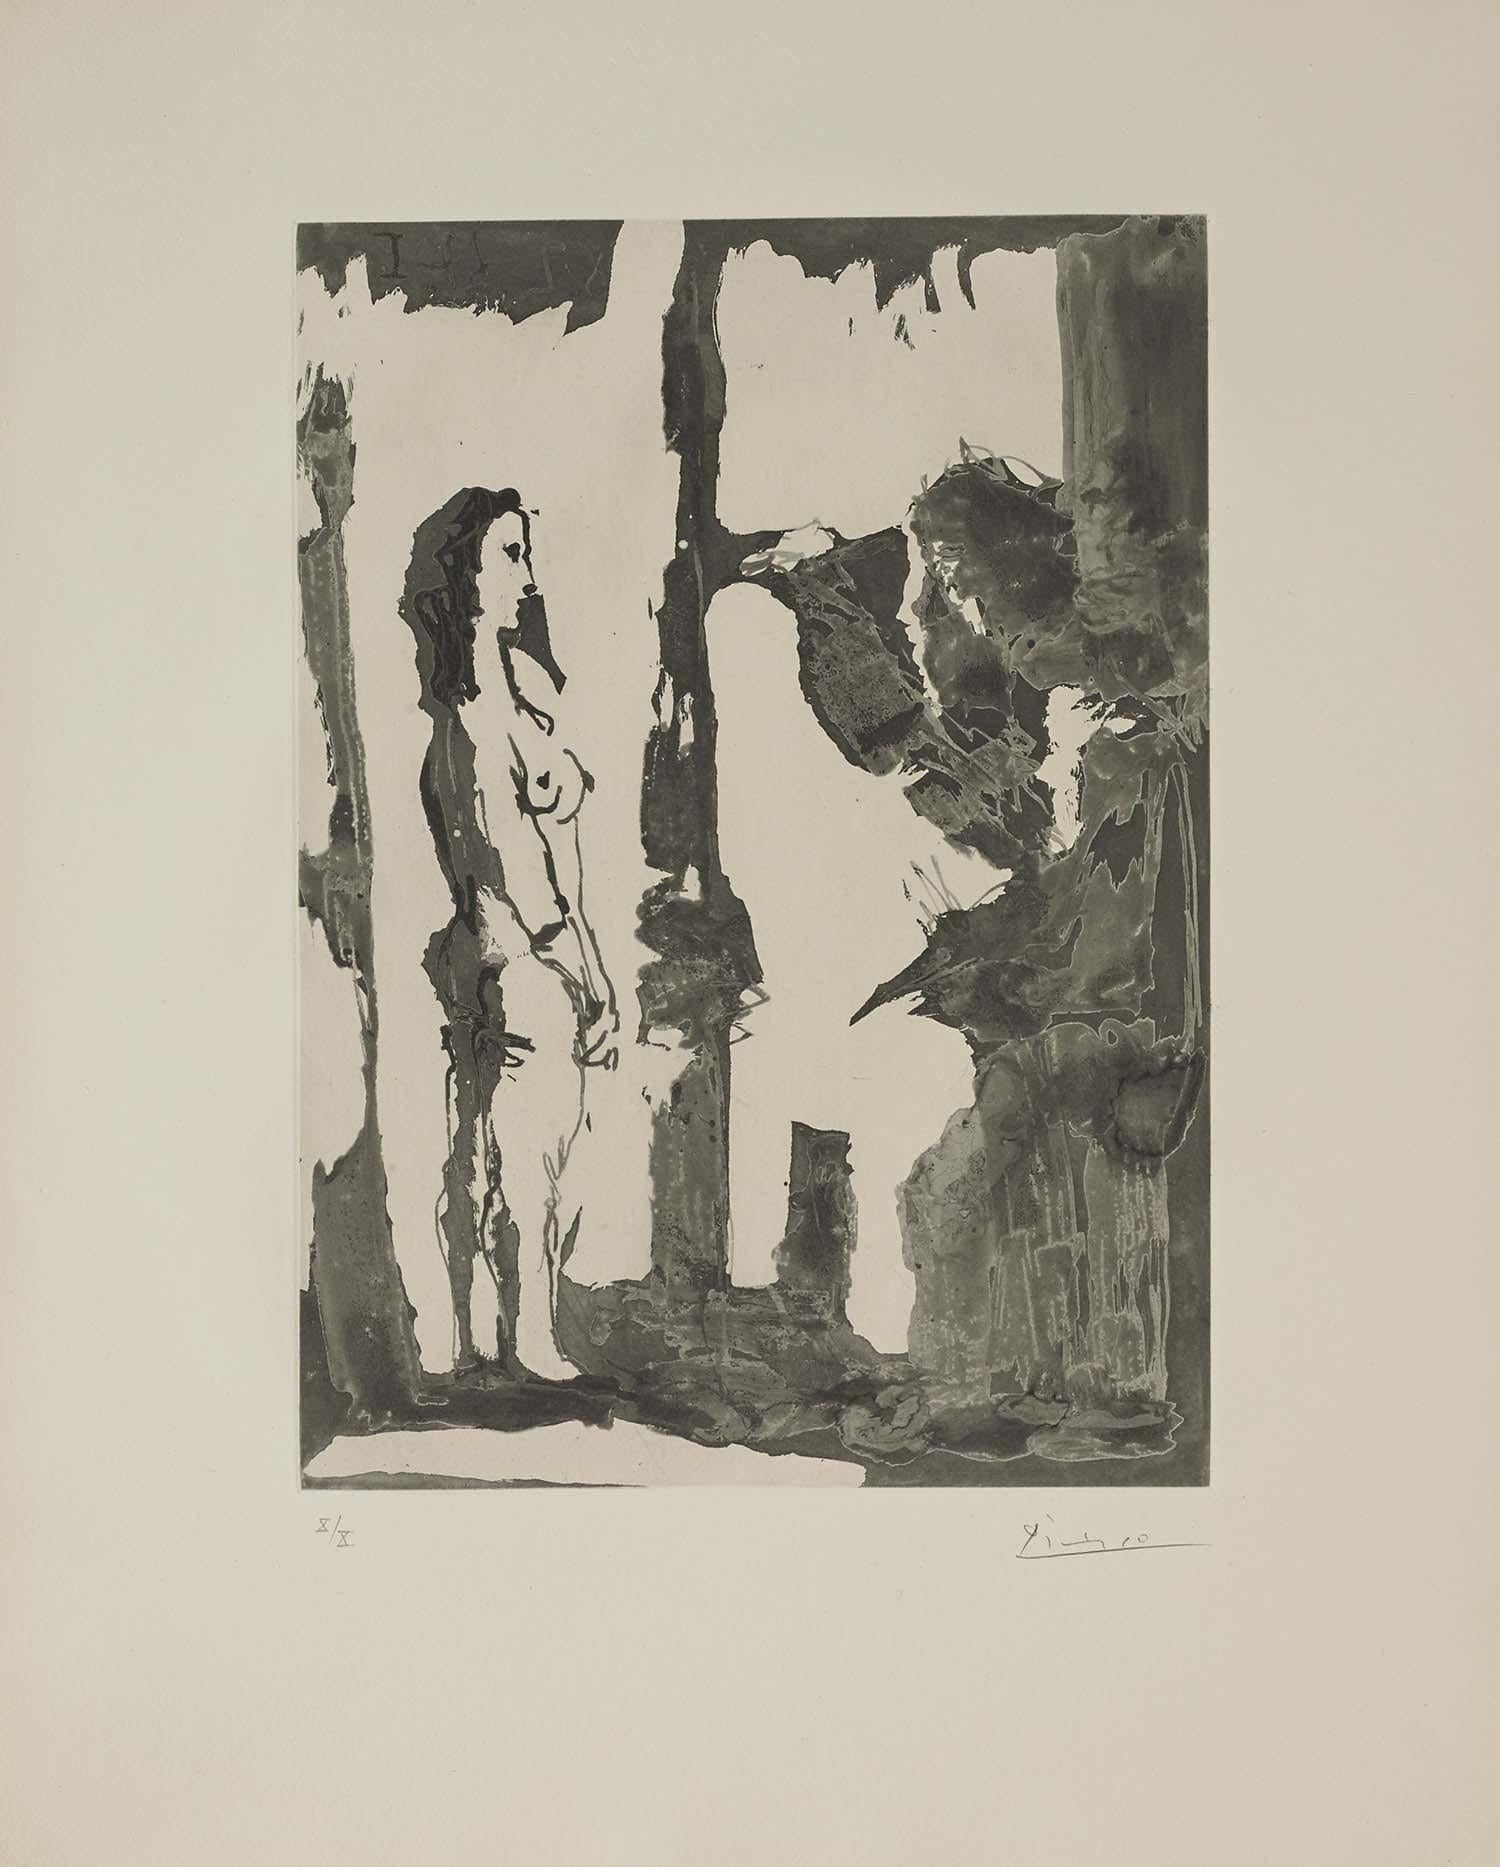 Painter and Model with Long Hair (Sable Mouvant- Quicksand, B.1184), 1966 - Print by Pablo Picasso